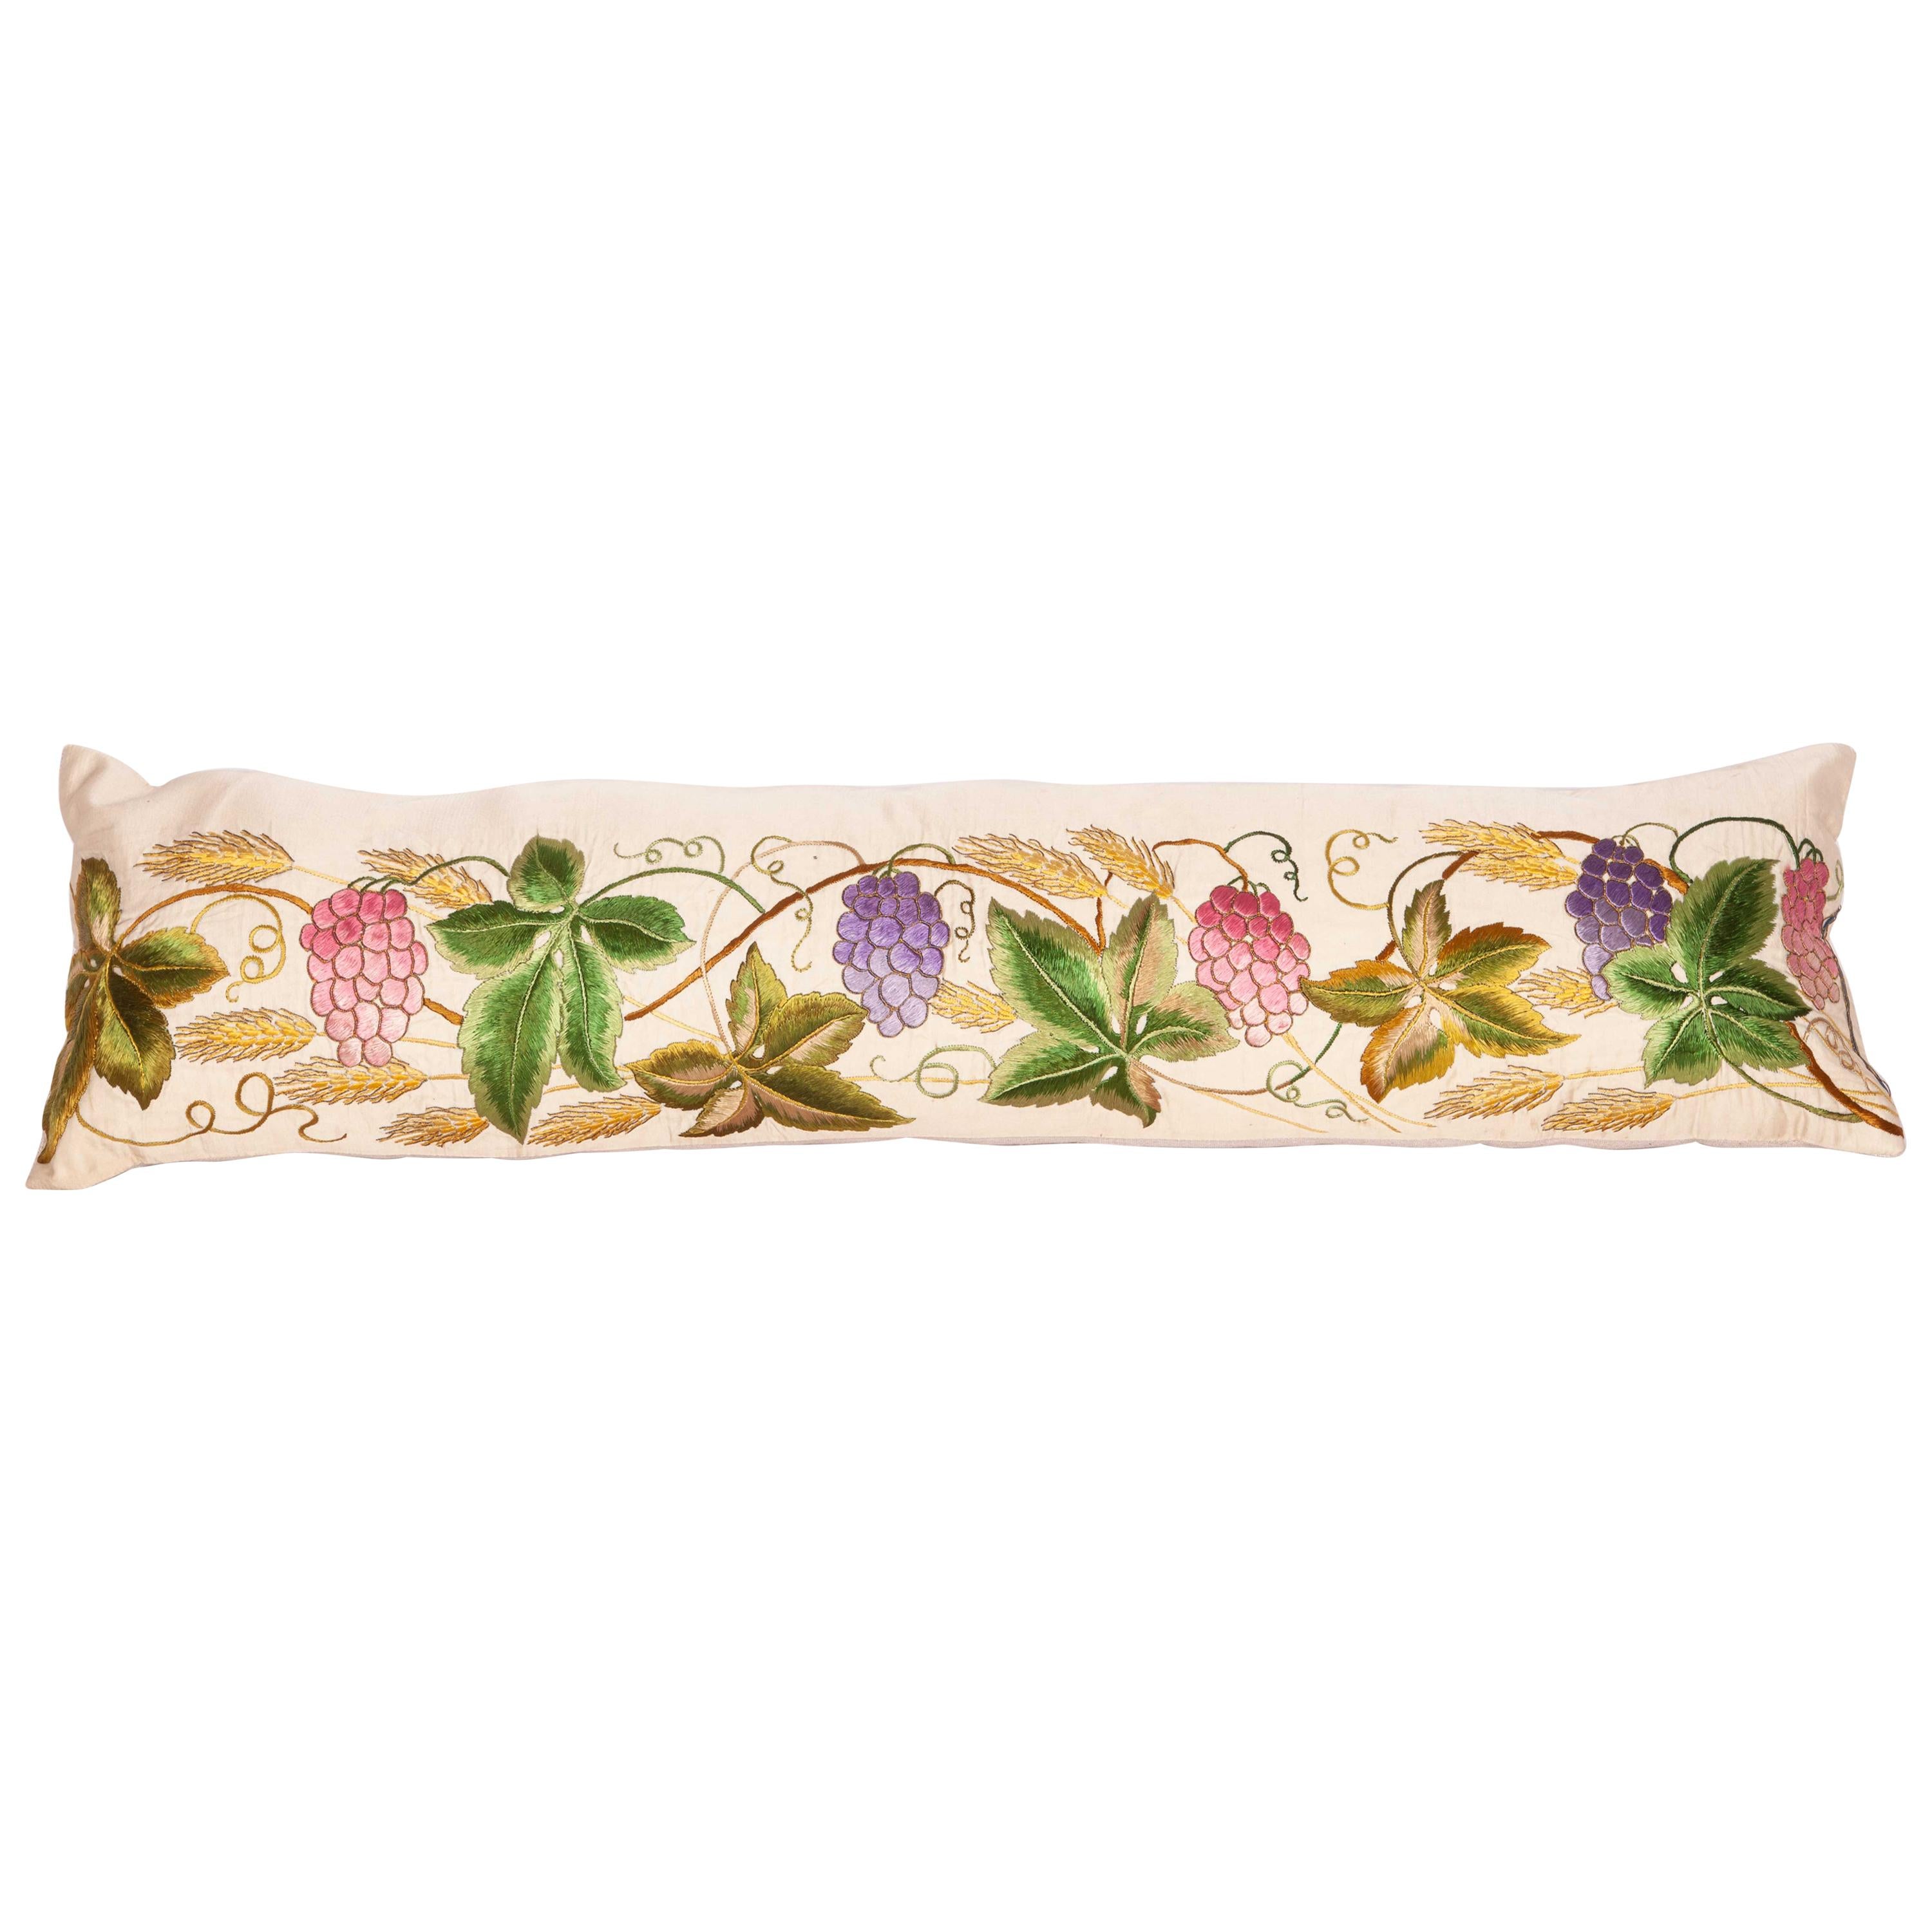 Antique Lumbar Pillow Case Made from an 18th-19th Century European Embroidery For Sale